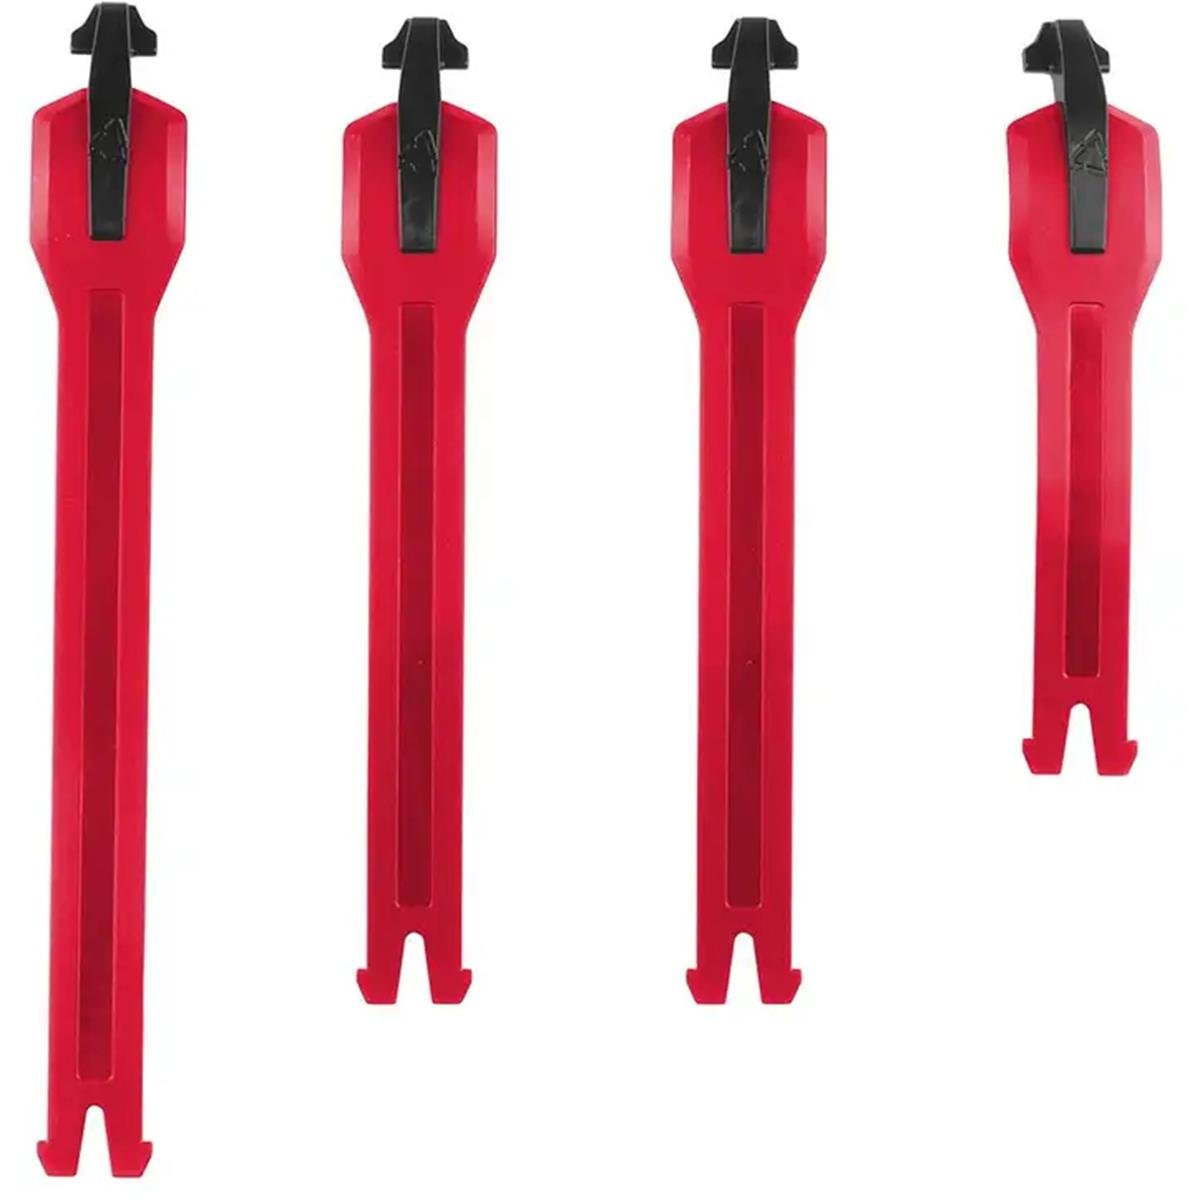 Leatt Replacement Strap Kit 4.5/5.5 Flexlock Red - 4 Pieces